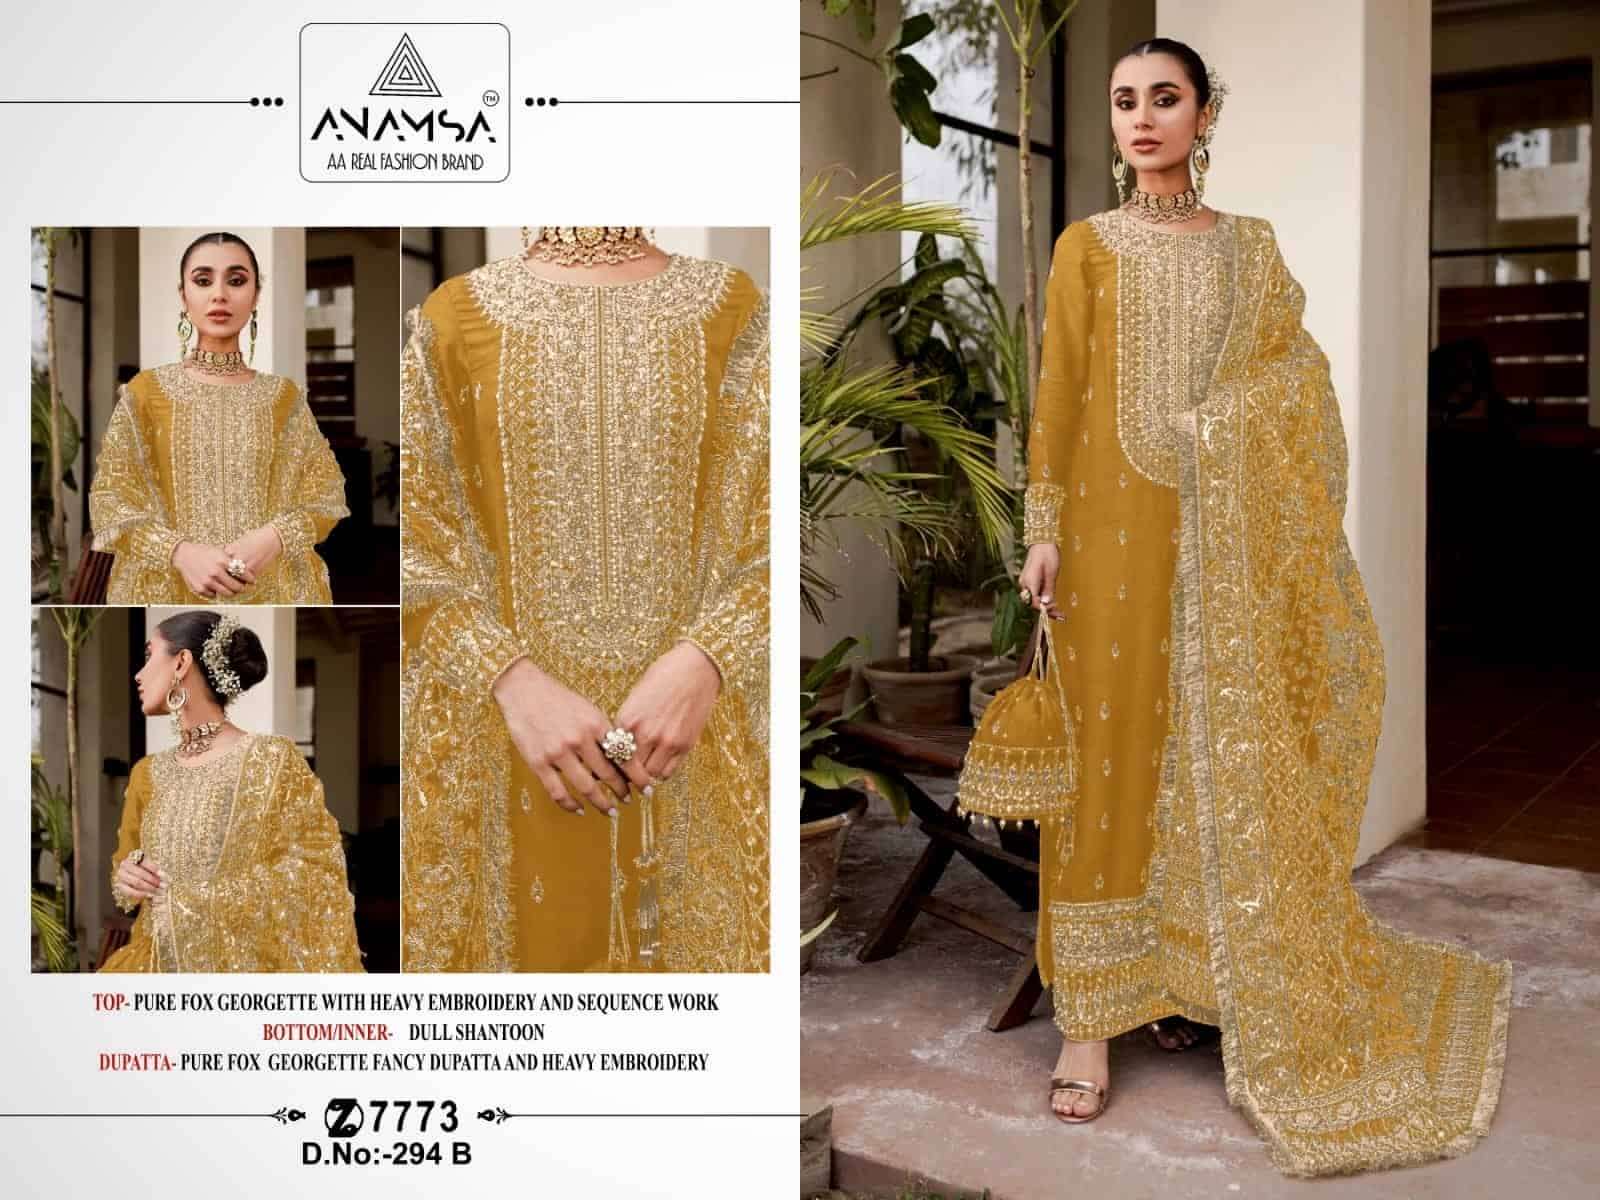 Anamsa 294 B Exclusive Georgette Heavy Embroidered Dress Selection